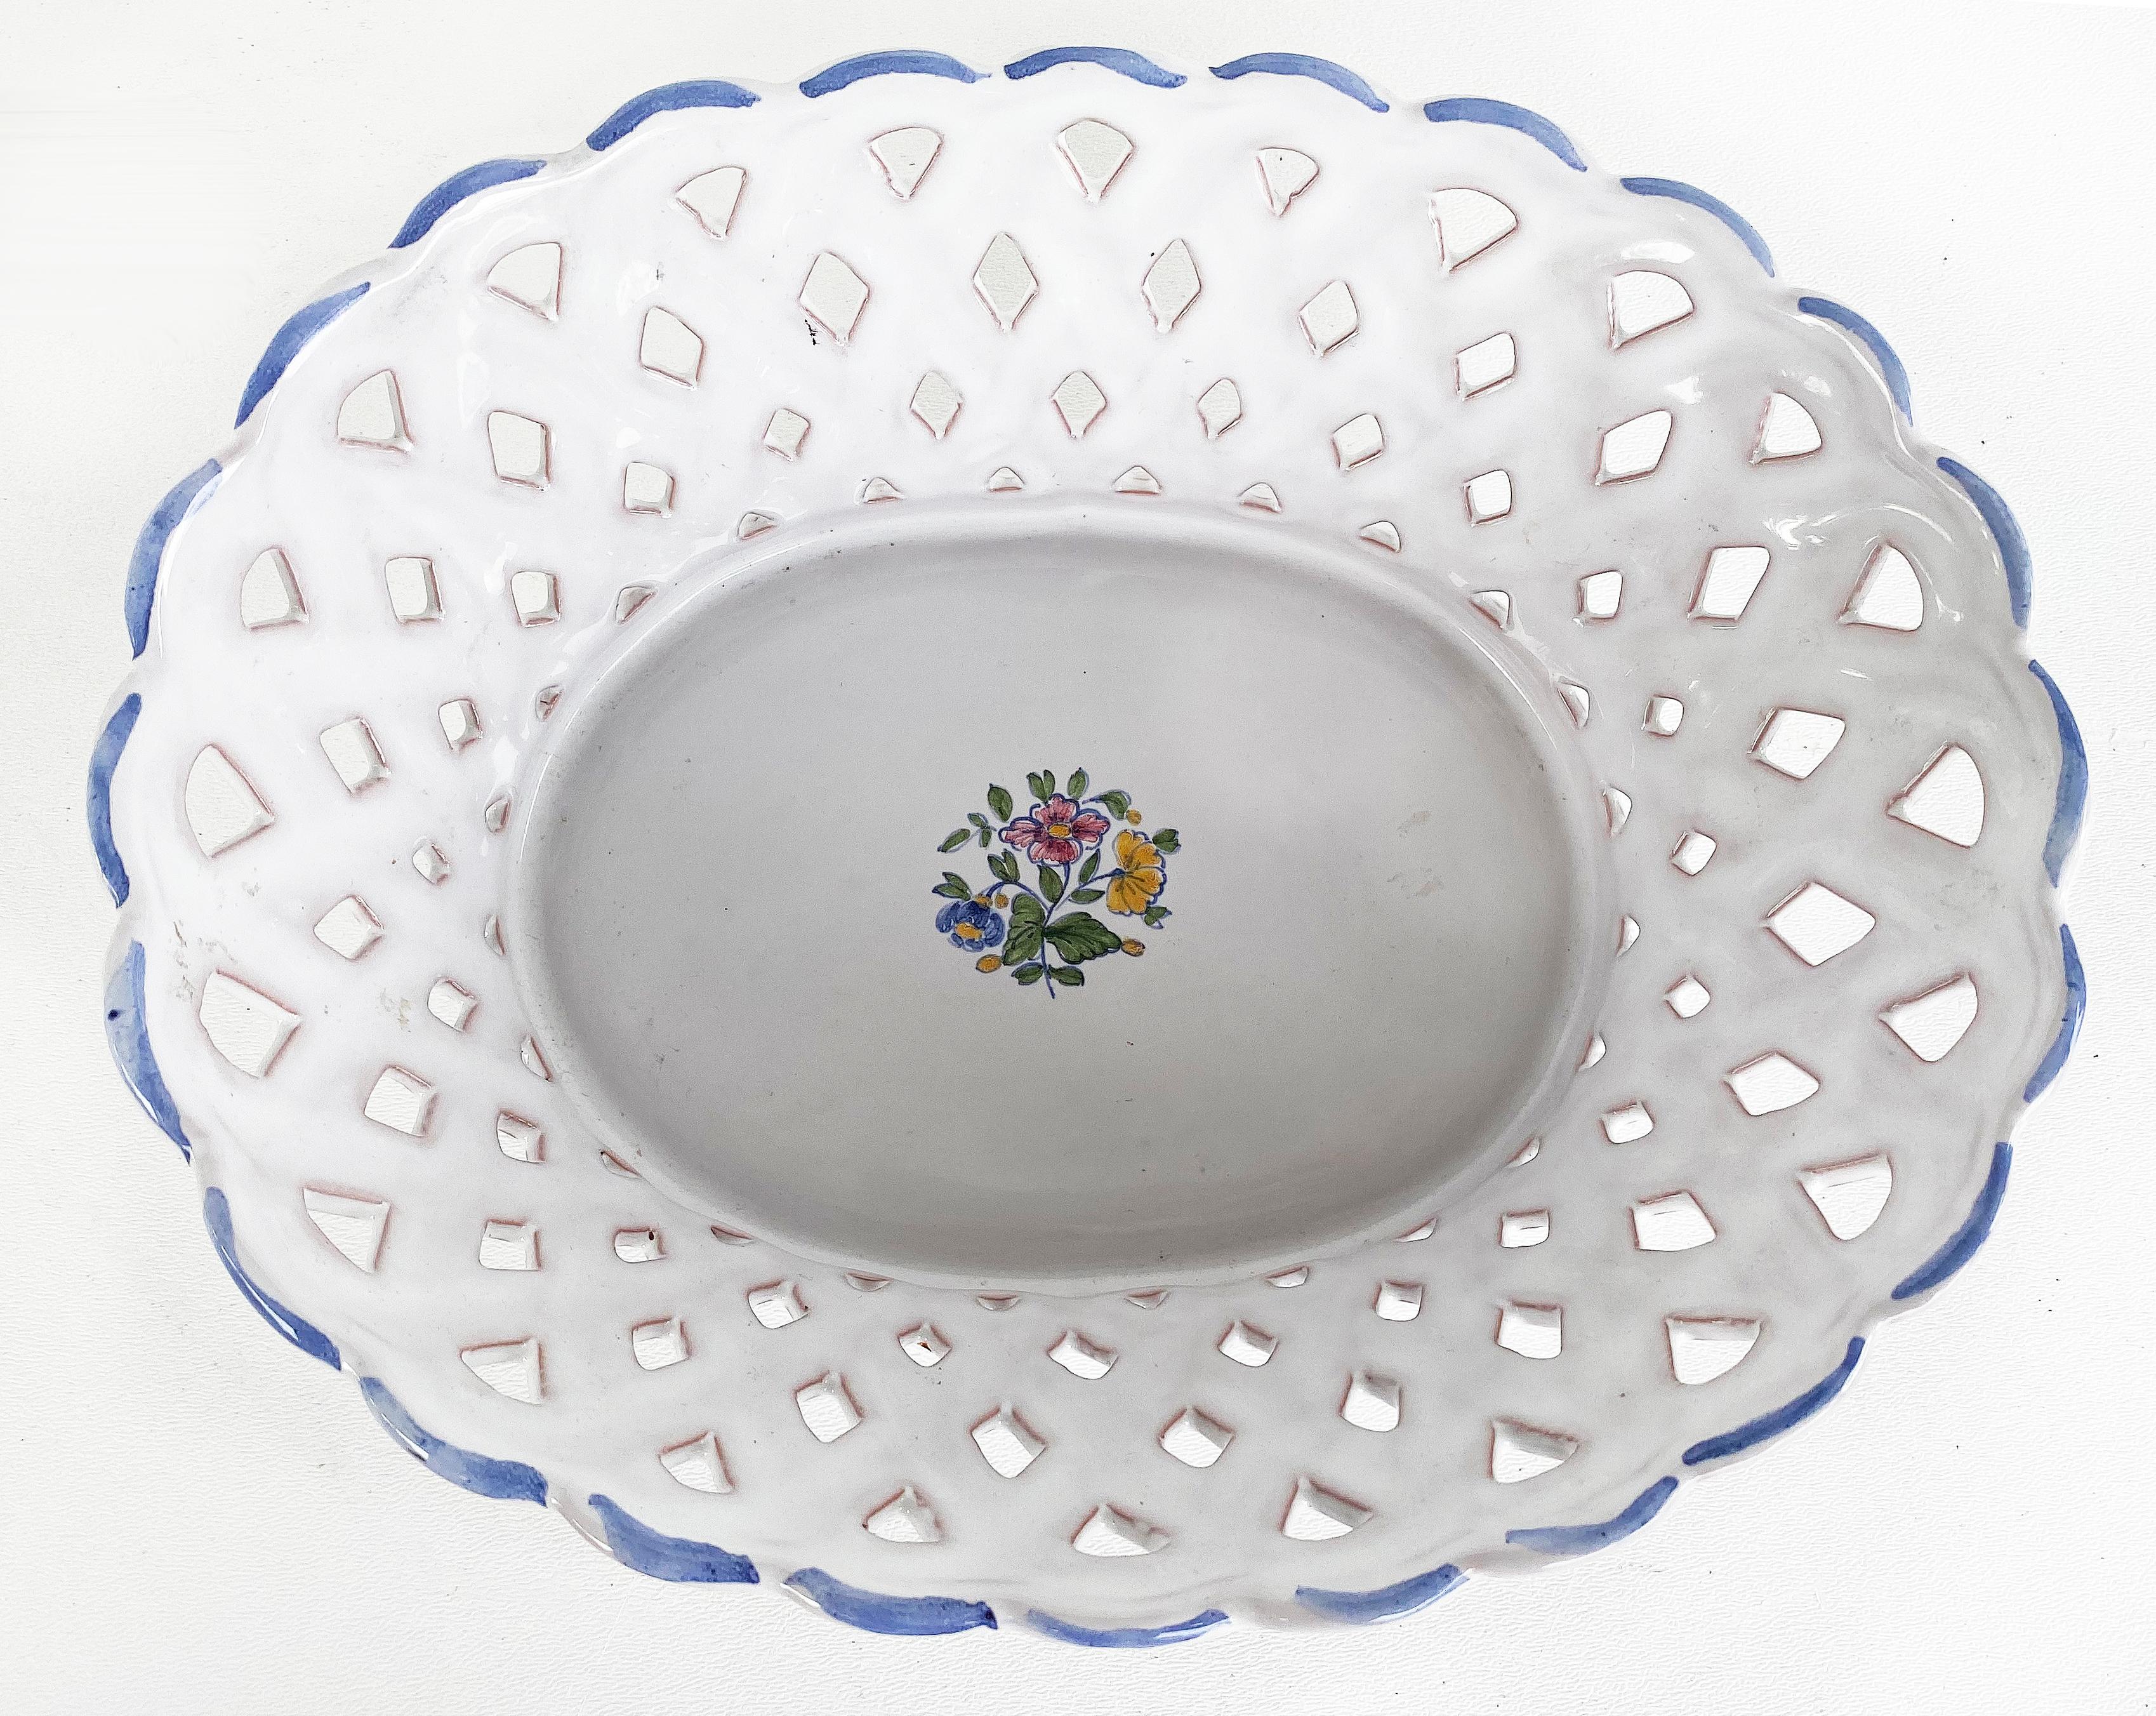 Vintage French Faience Pierre Deux Lattice fruit bowl, Moustiers, France

Offered is a 1960s French Faience Pierre Deux Lattice fruit bowl with handpainted floral details and blue edge timing. The bowl is fully marked on the base and marked